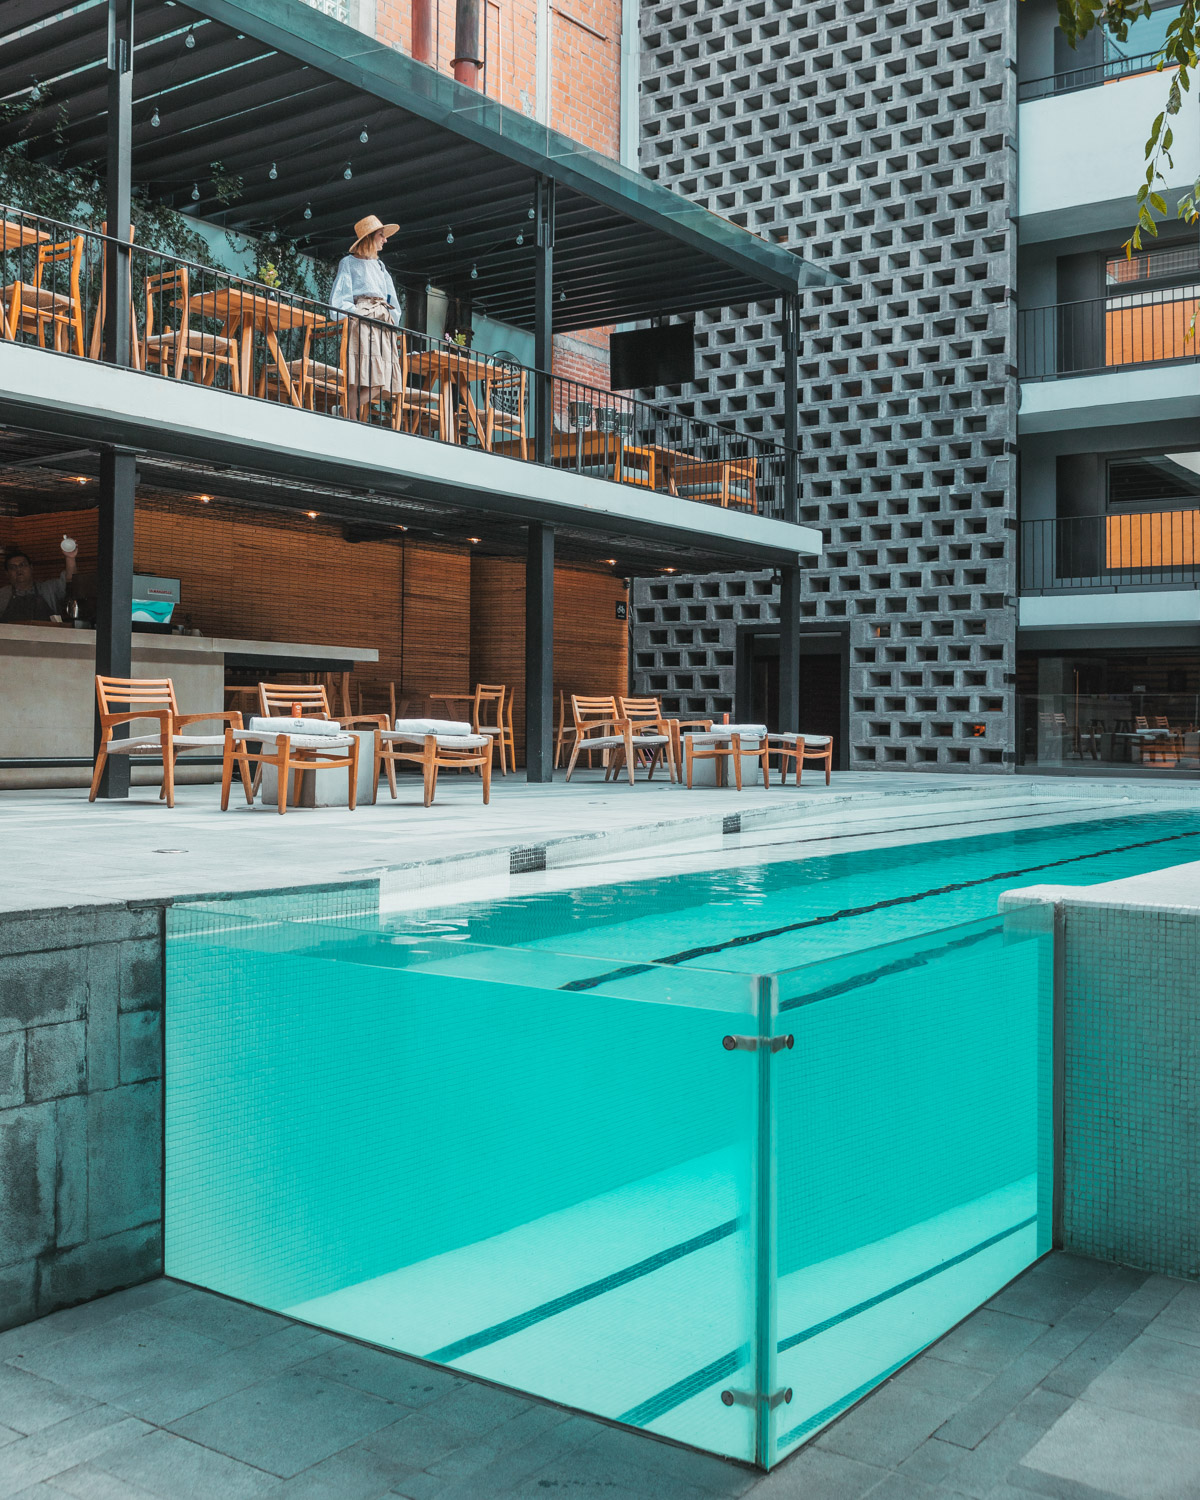 The pool at Hotel Carlota // The Most Instagrammable Spots in Mexico City #readysetjetset